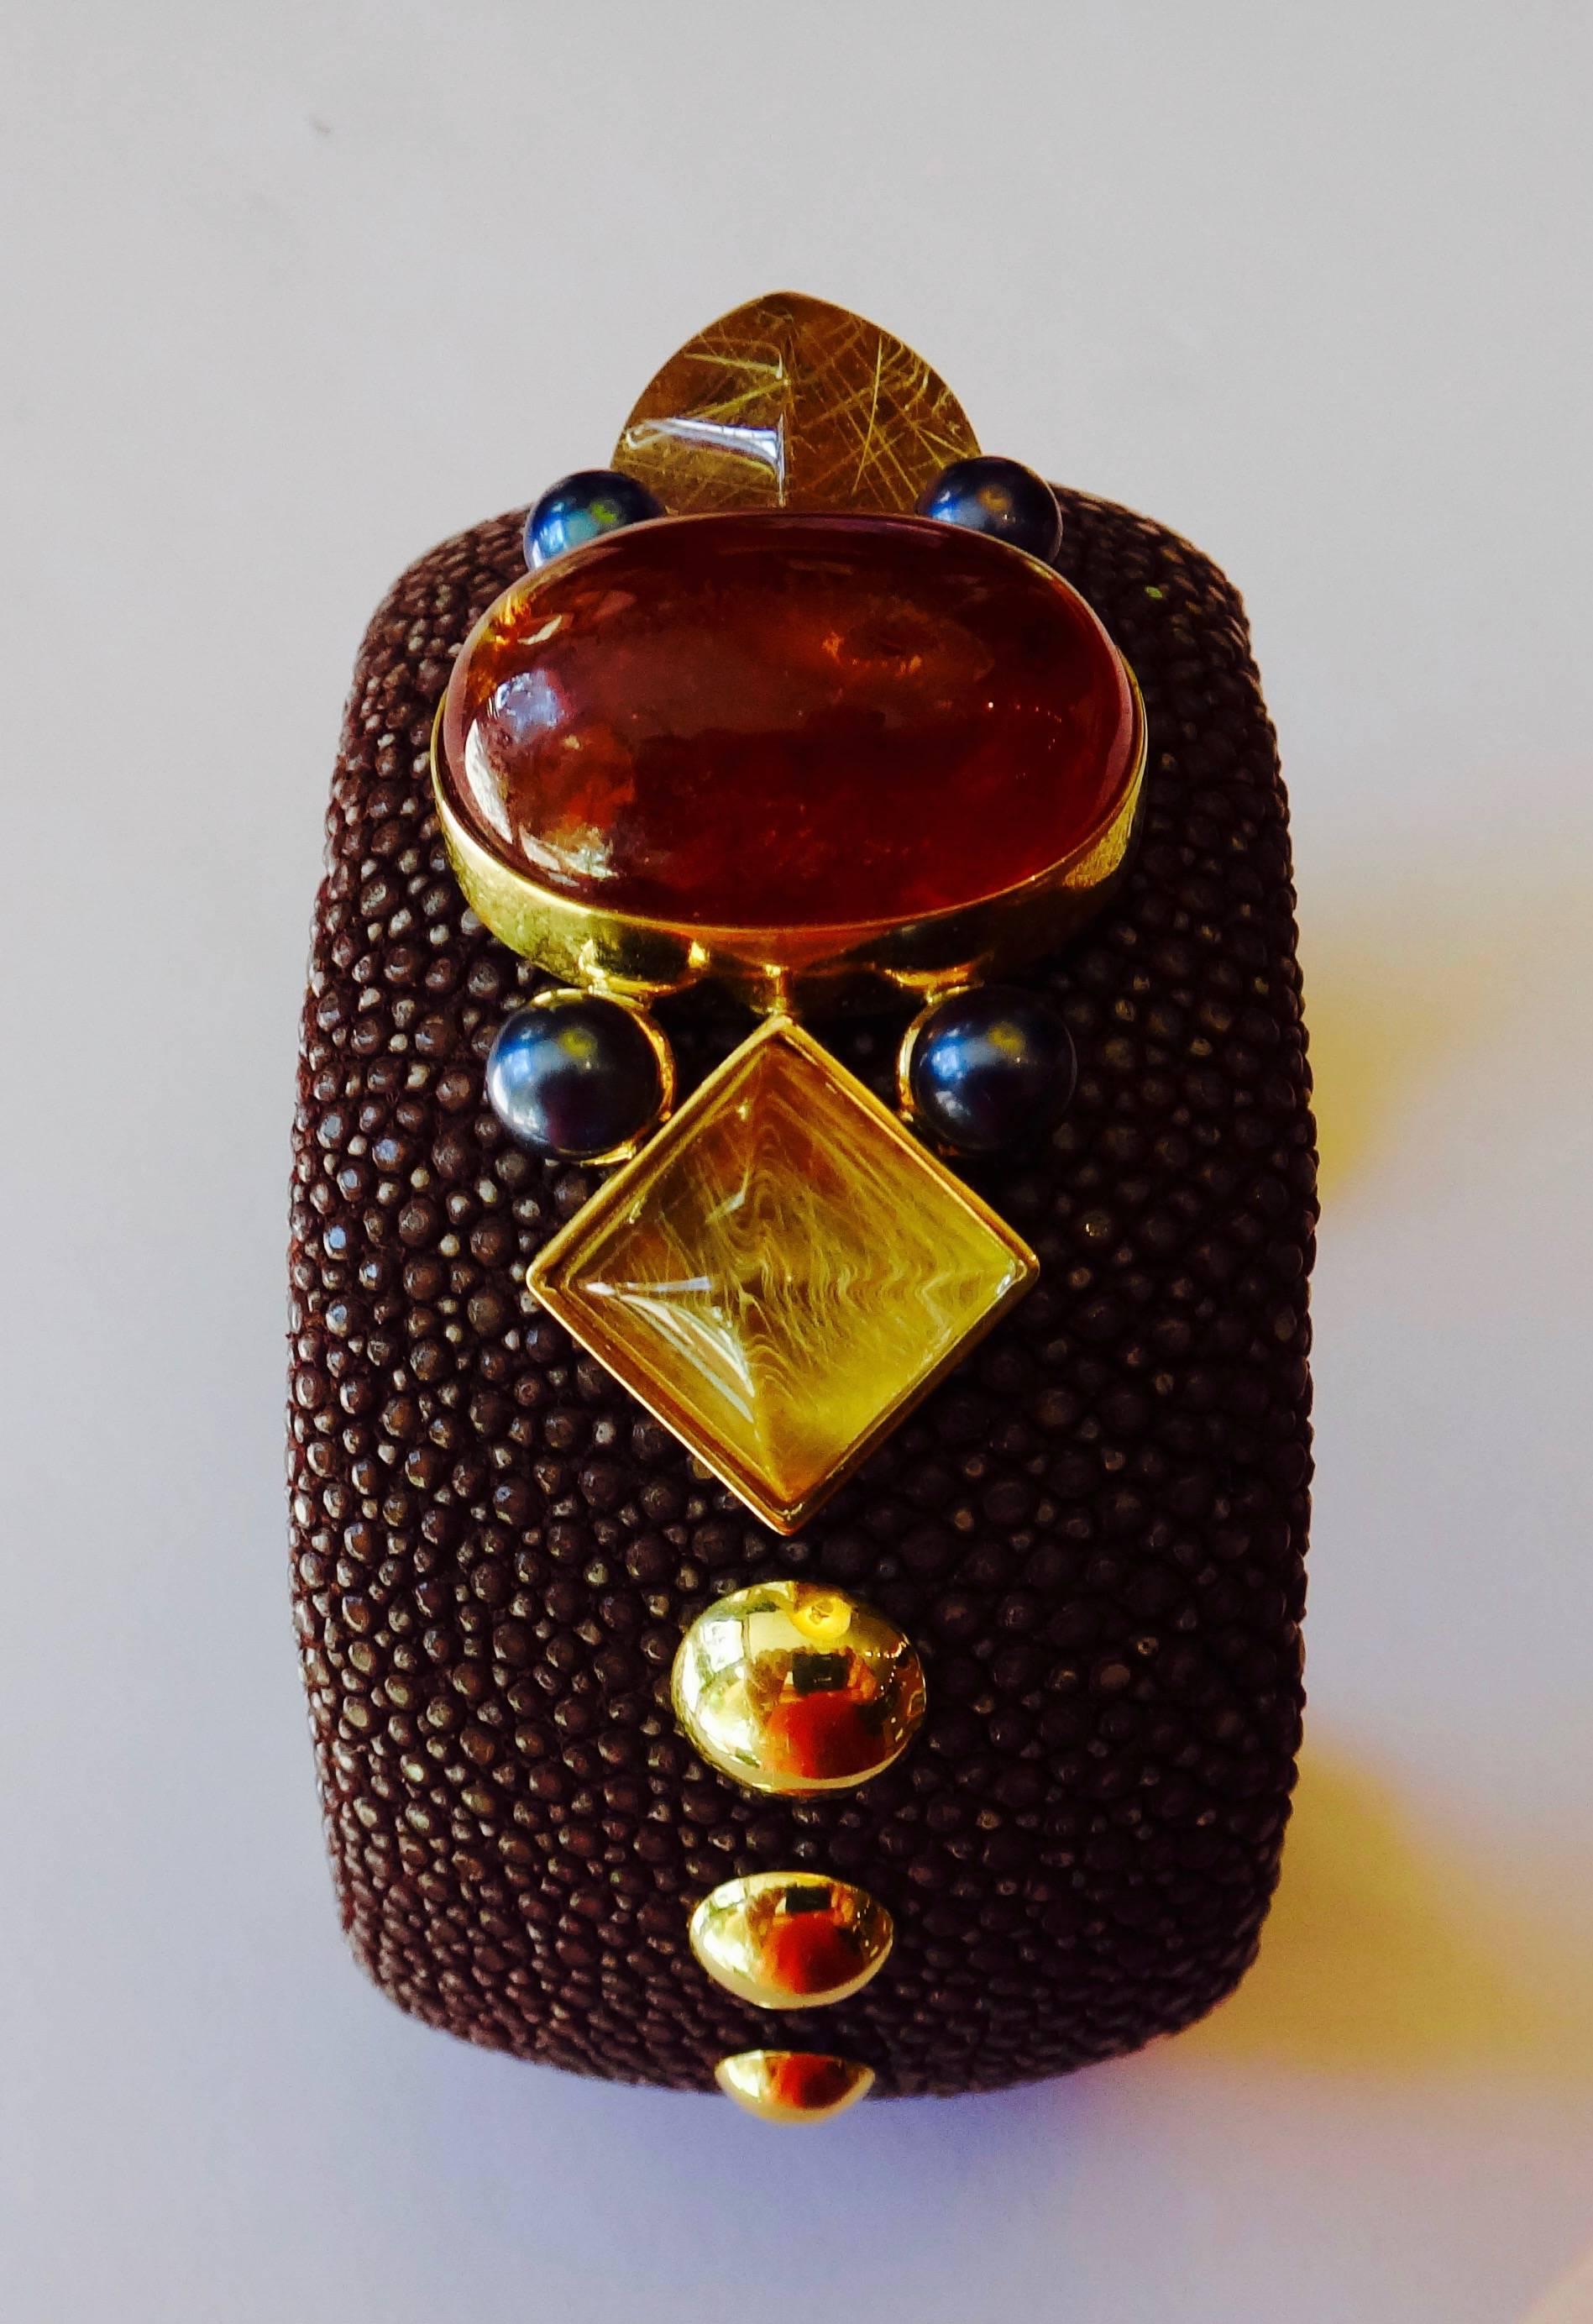 Mocha colored stringray cuff is decorated with a large cabochon hessonite garnet, 2 sugarloaf cabochons of rutilated quartz and black Akoya pearls.  All set in 18k yellow gold.  Inside diameter is 6.75 inches.  There is a sprung steel core within